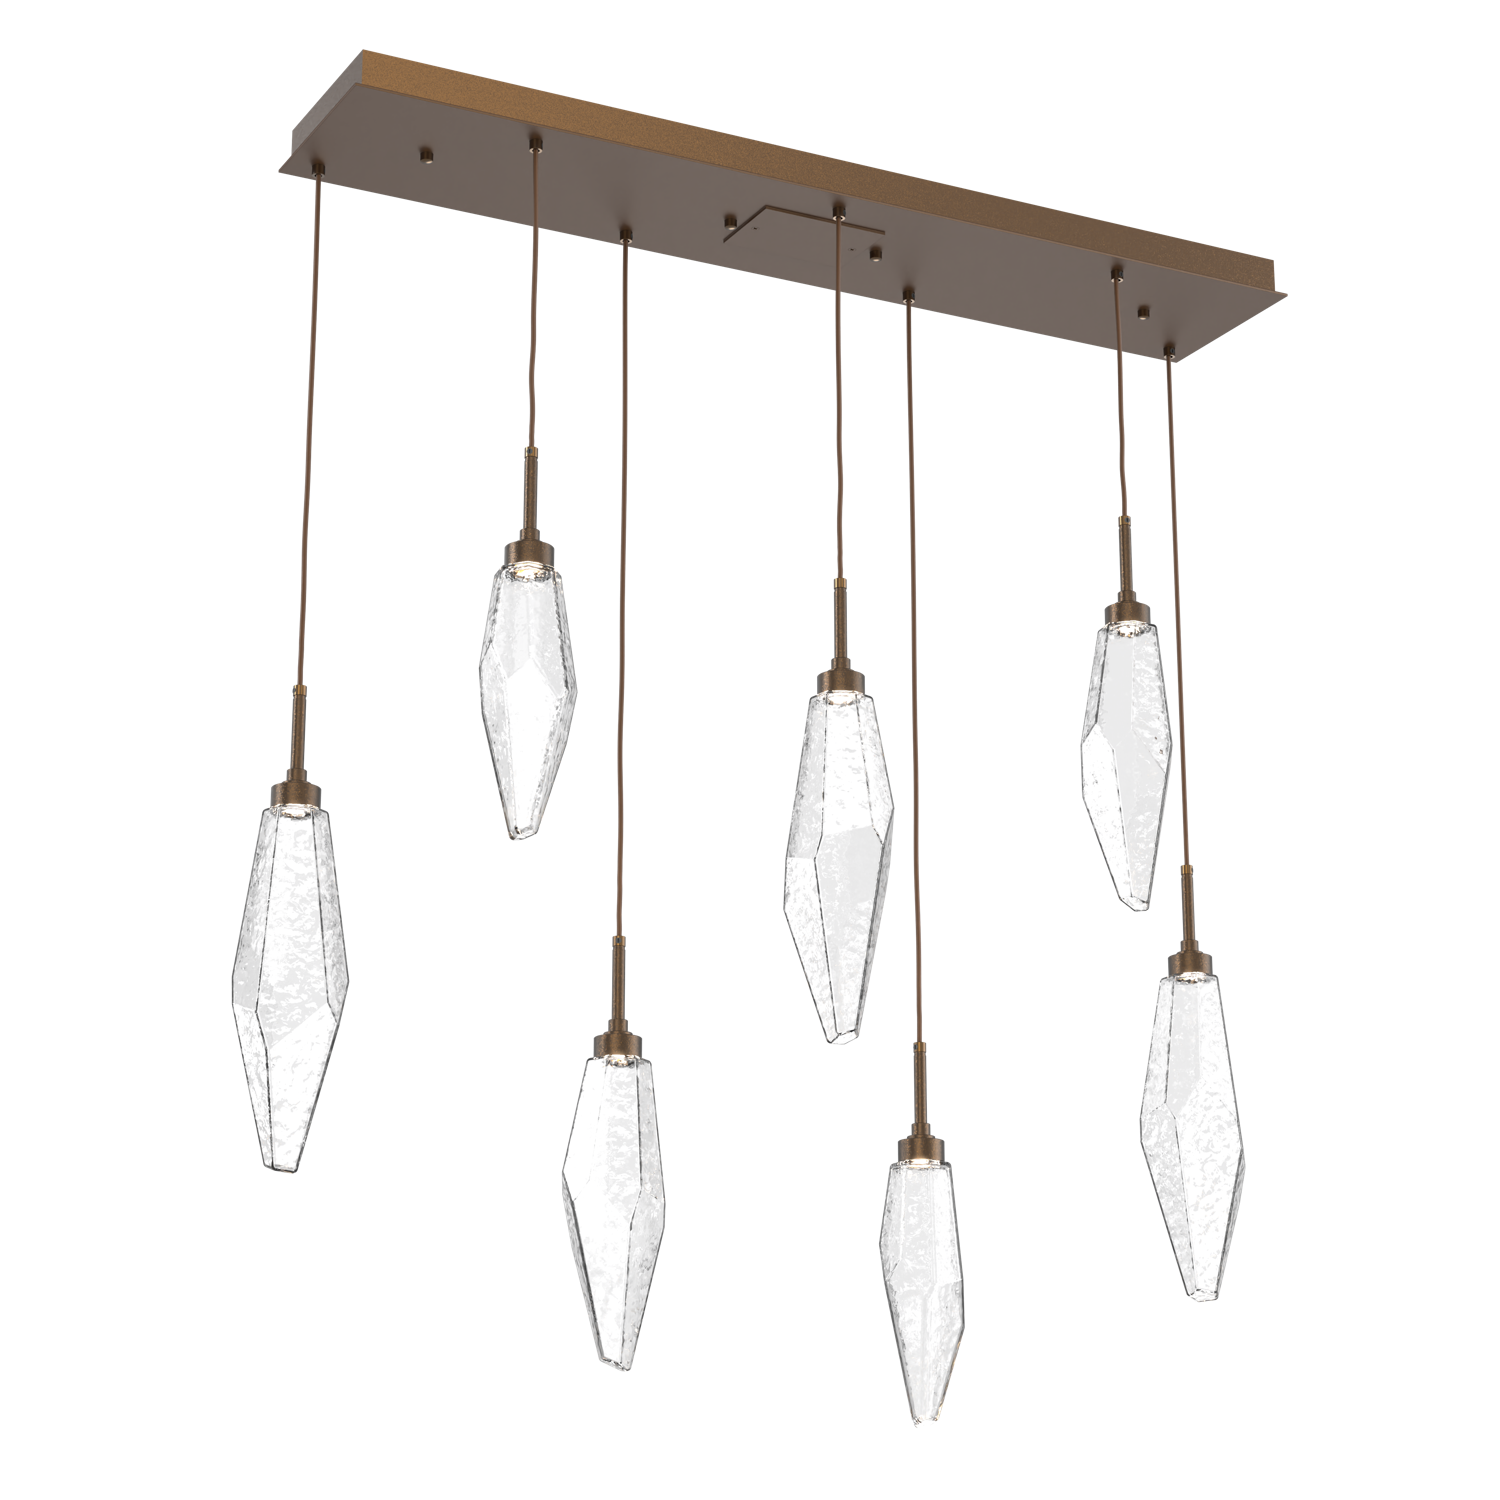 PLB0050-07-FB-CC-Hammerton-Studio-Rock-Crystal-7-light-linear-pendant-chandelier-with-flat-bronze-finish-and-clear-glass-shades-and-LED-lamping